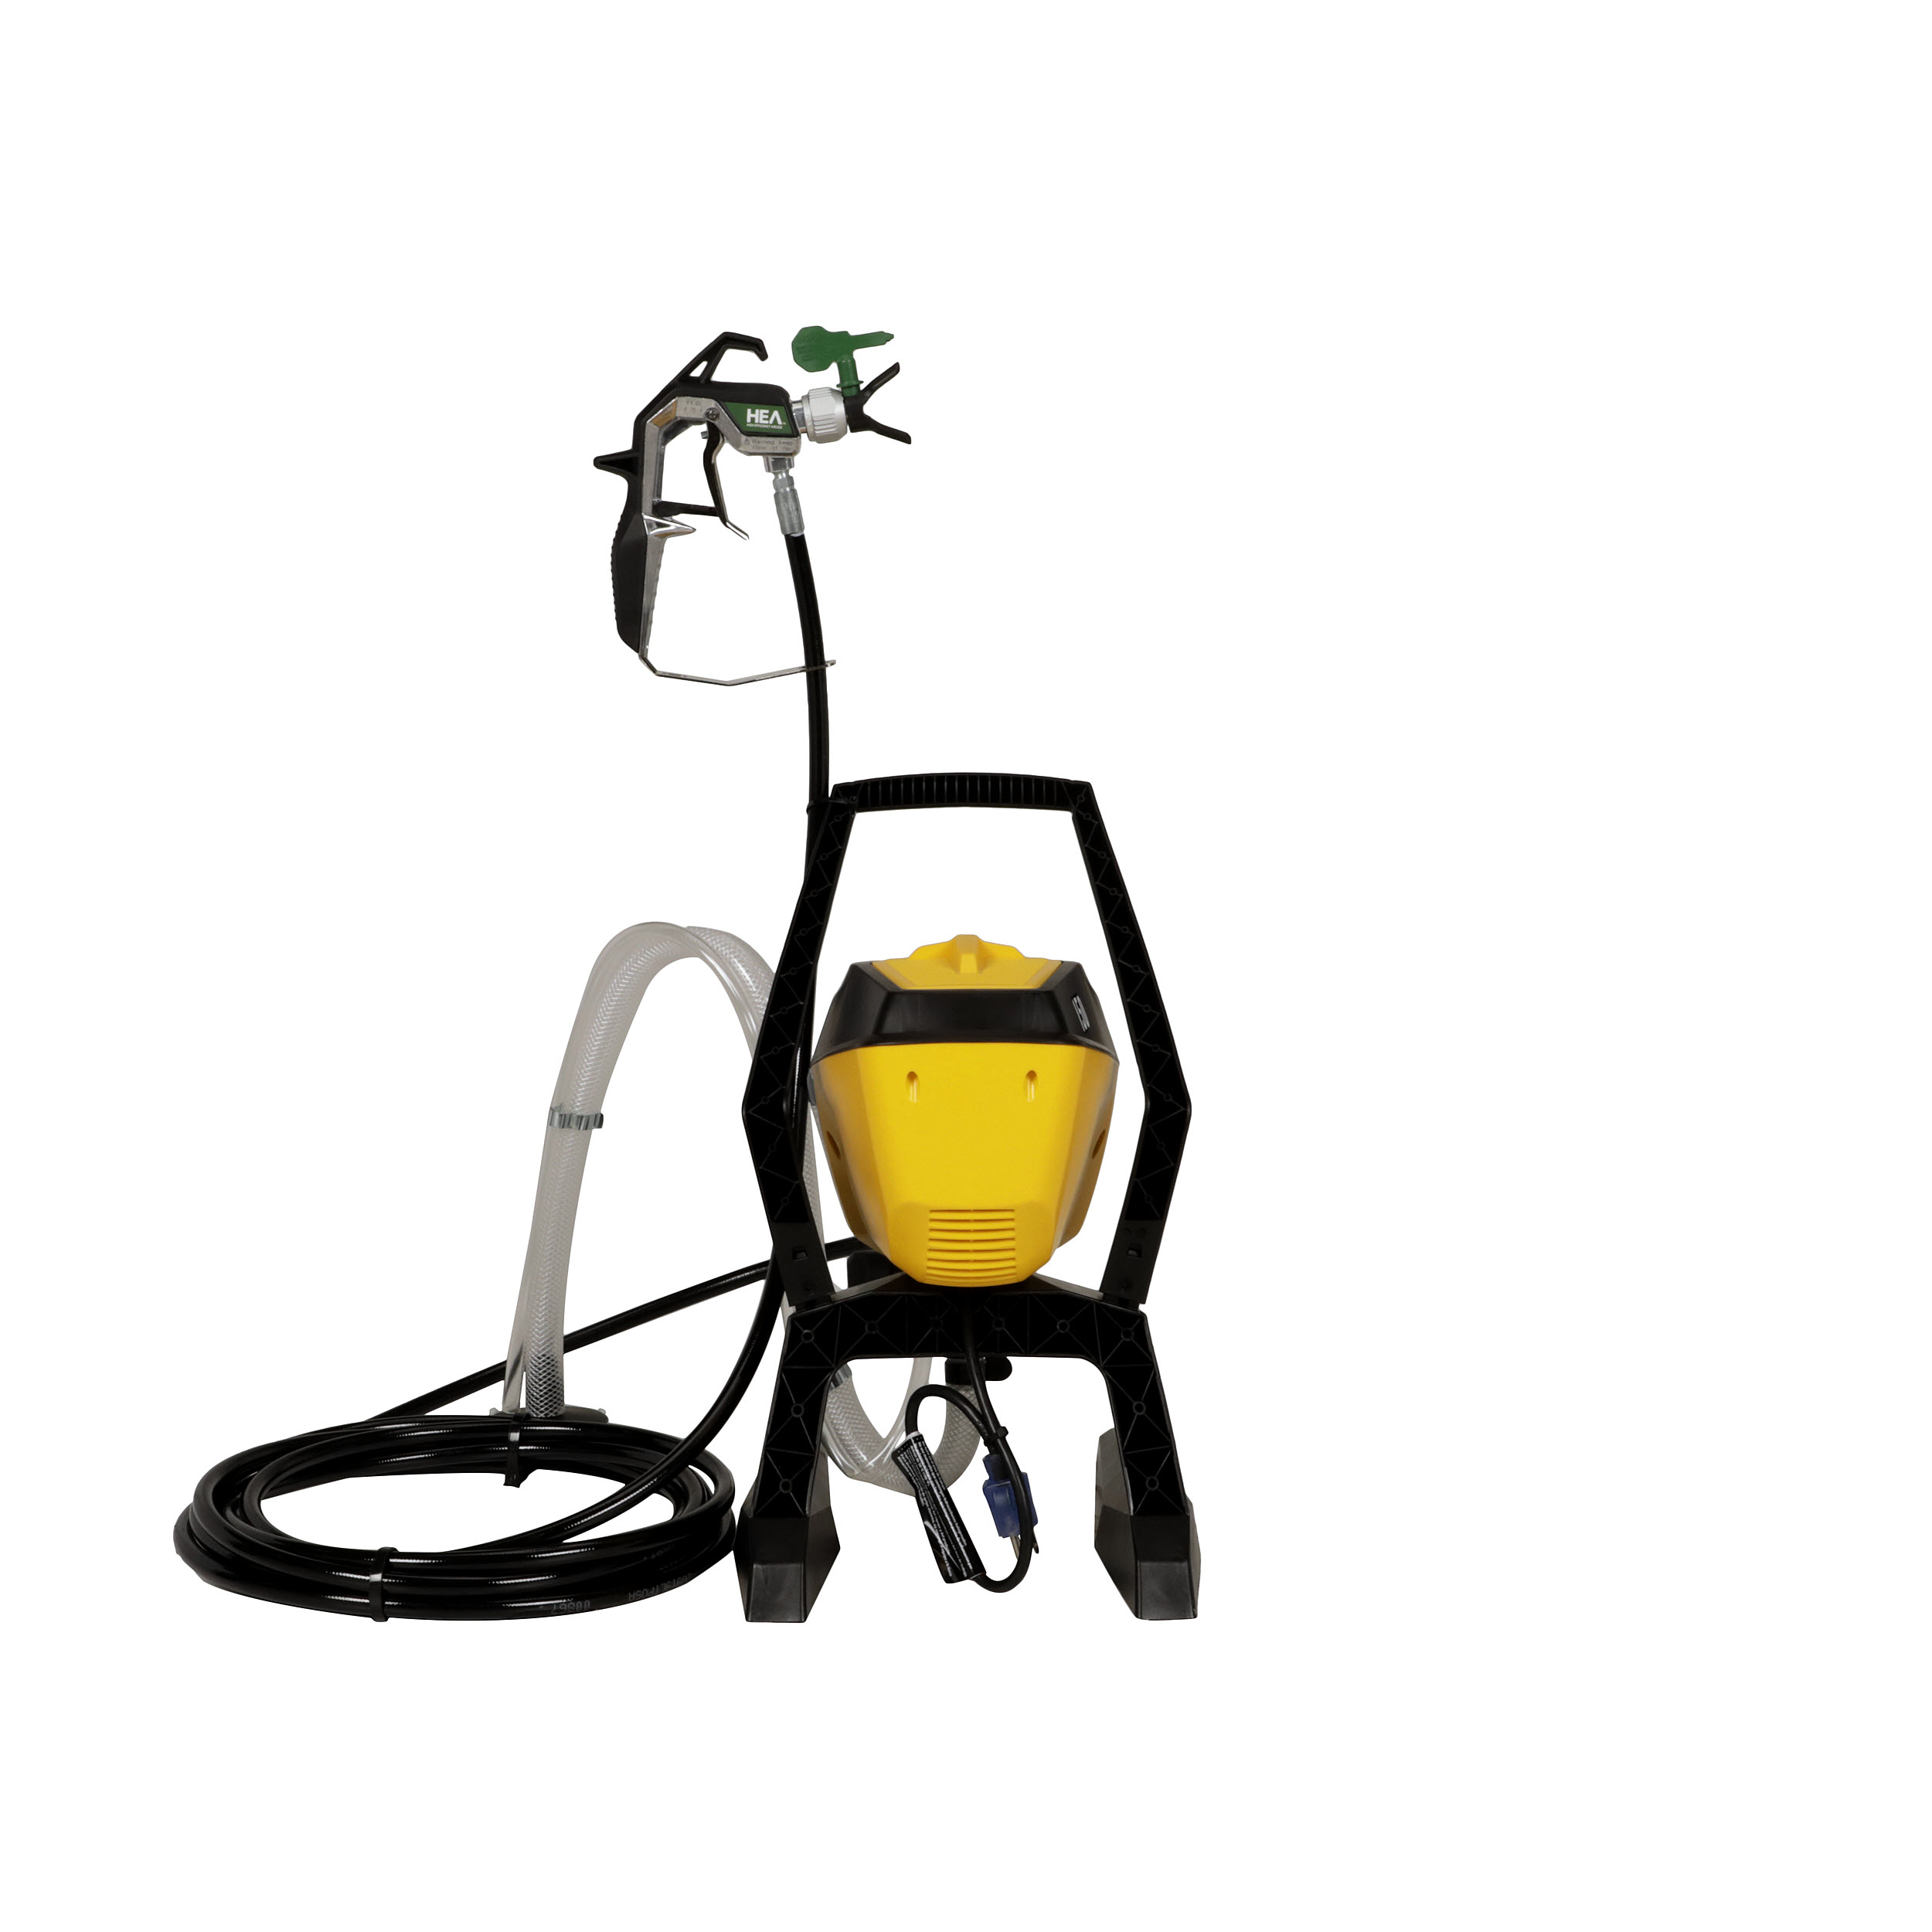 Low Overspray 150 with Control Wagner Efficiency Airless Pro High Paint Sprayer,